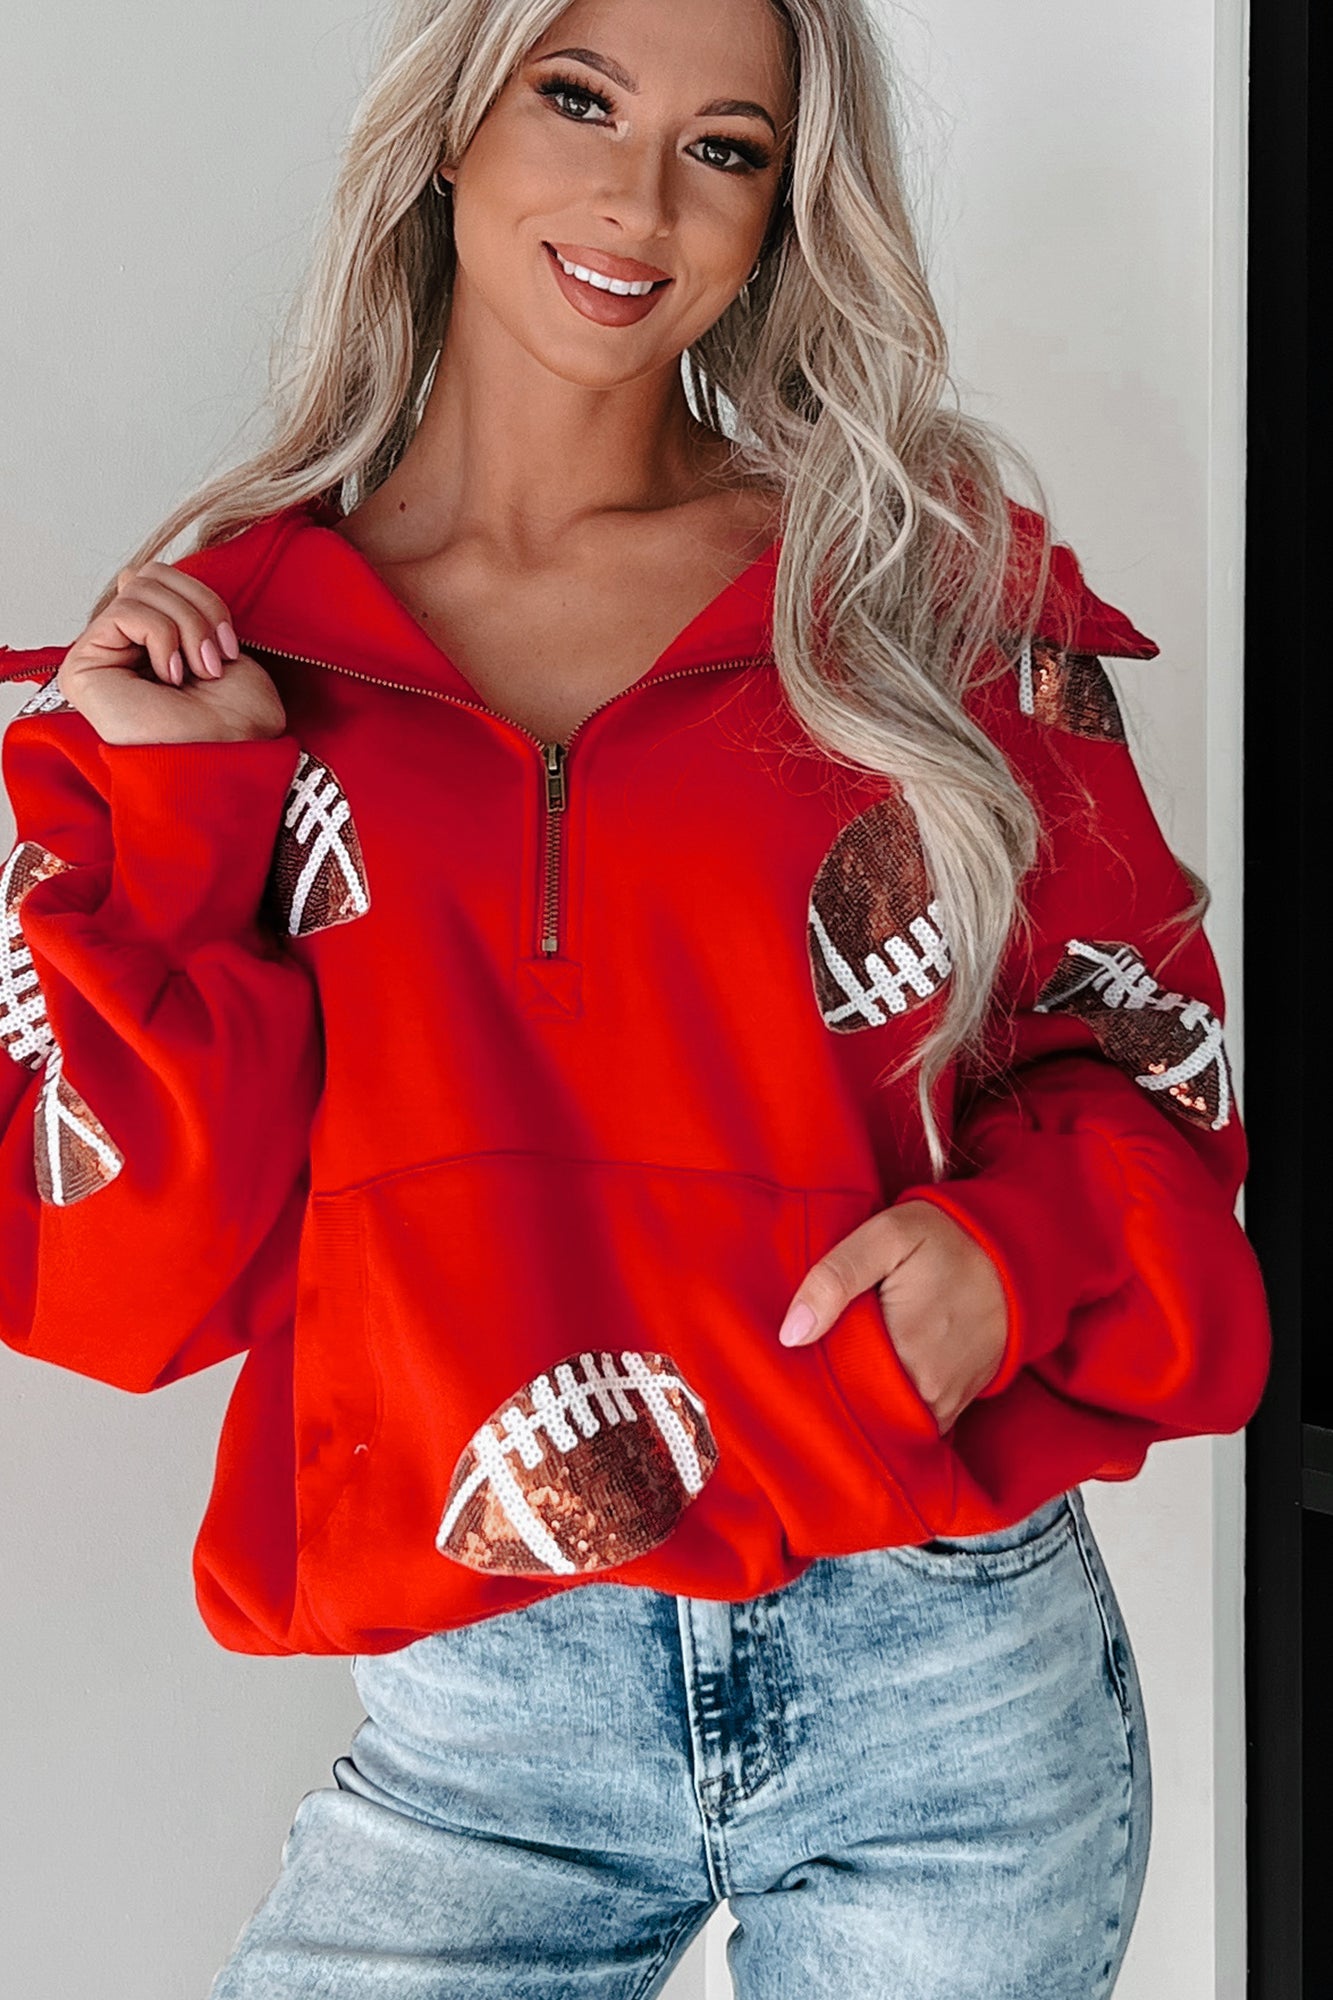 Kickoff Time Half-Zip Sequin Football Patch Hoodie (Red) - NanaMacs